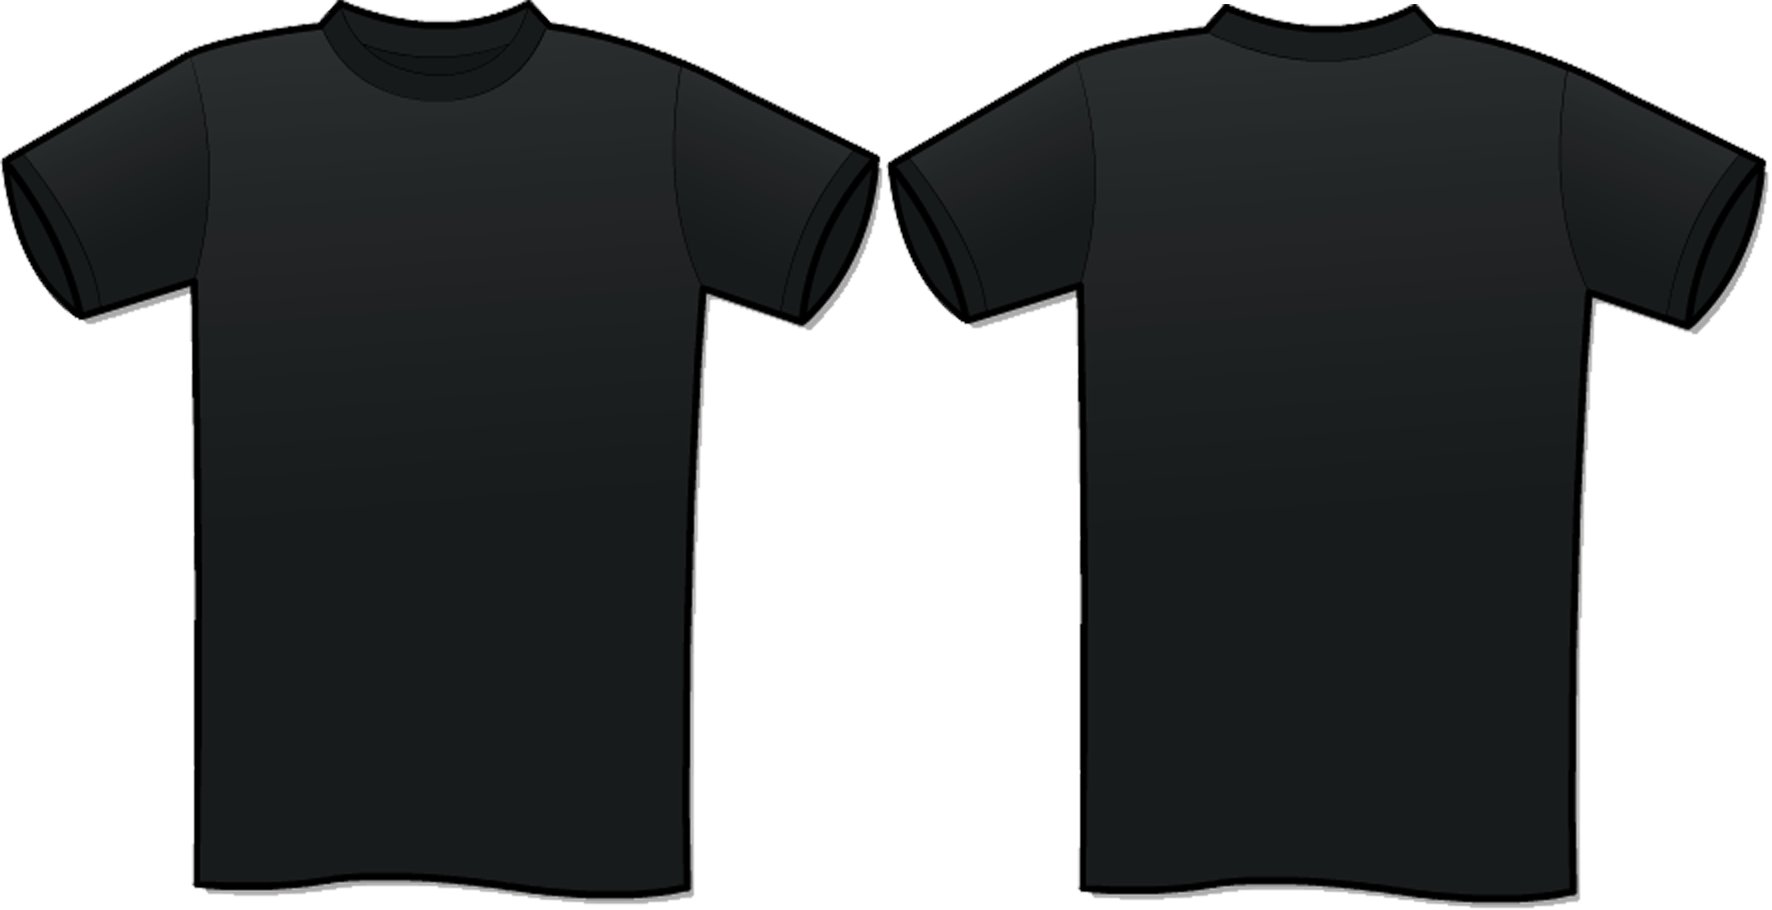 adobe photoshop t shirt template free download